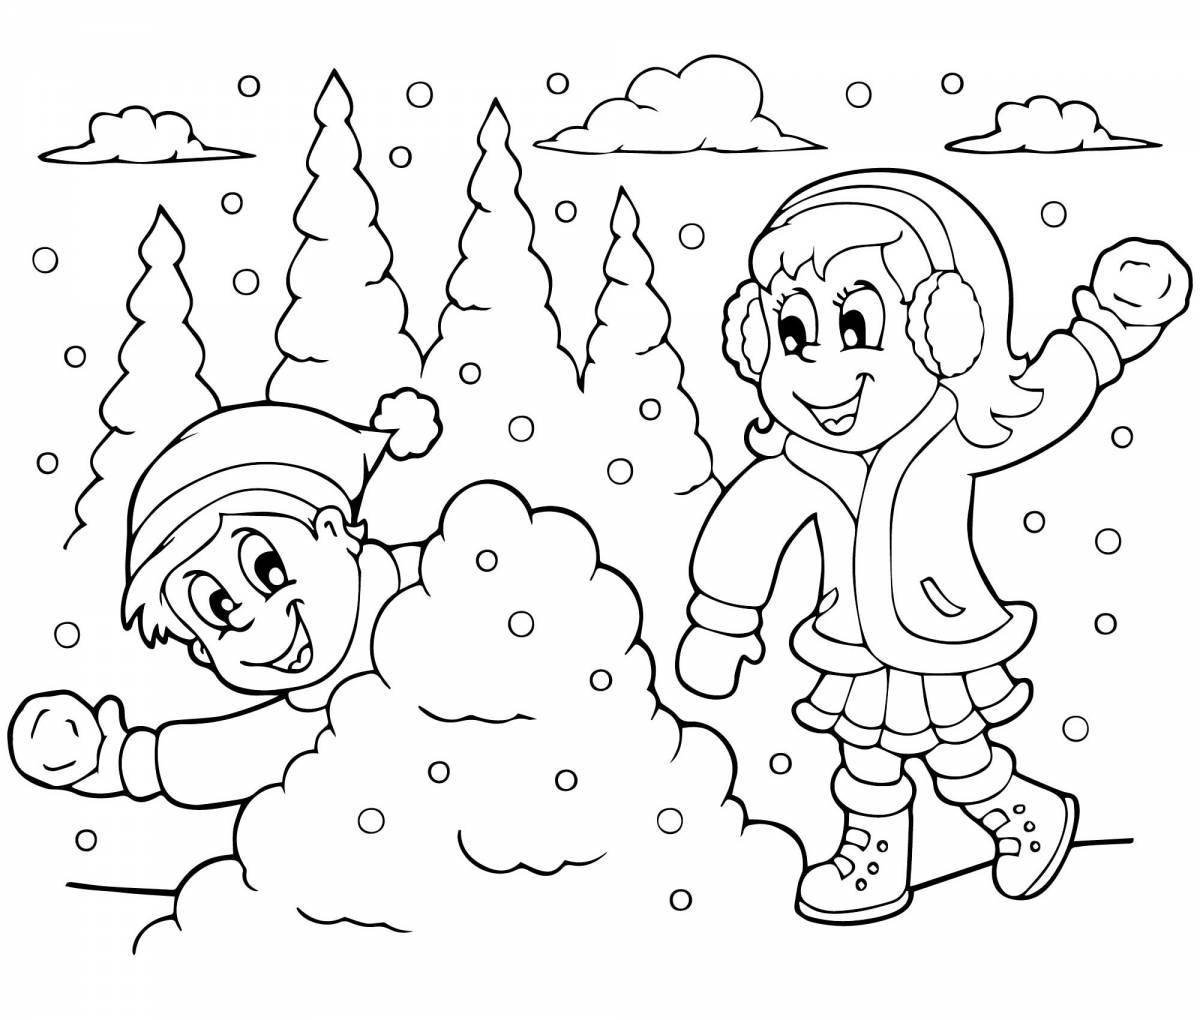 Amazing coloring book for children 6 years old winter